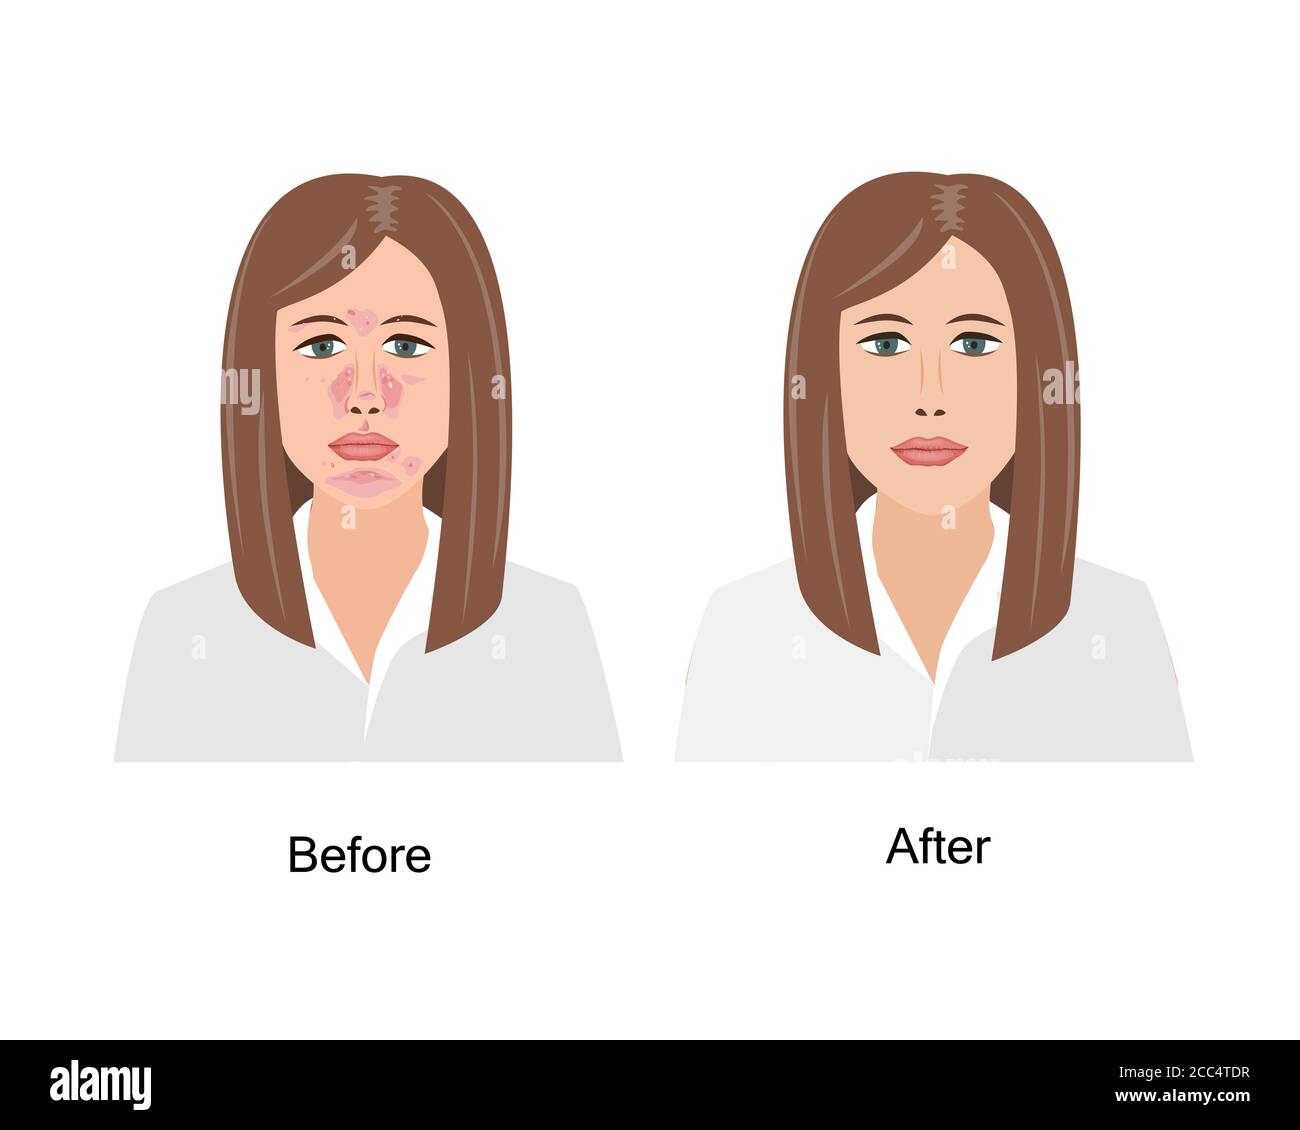 Woman Suffering from Seborrheic Dermatitis before and after medical treatment. Vector illustration. Adult or teenager face with skin problems isolated Stock Vector